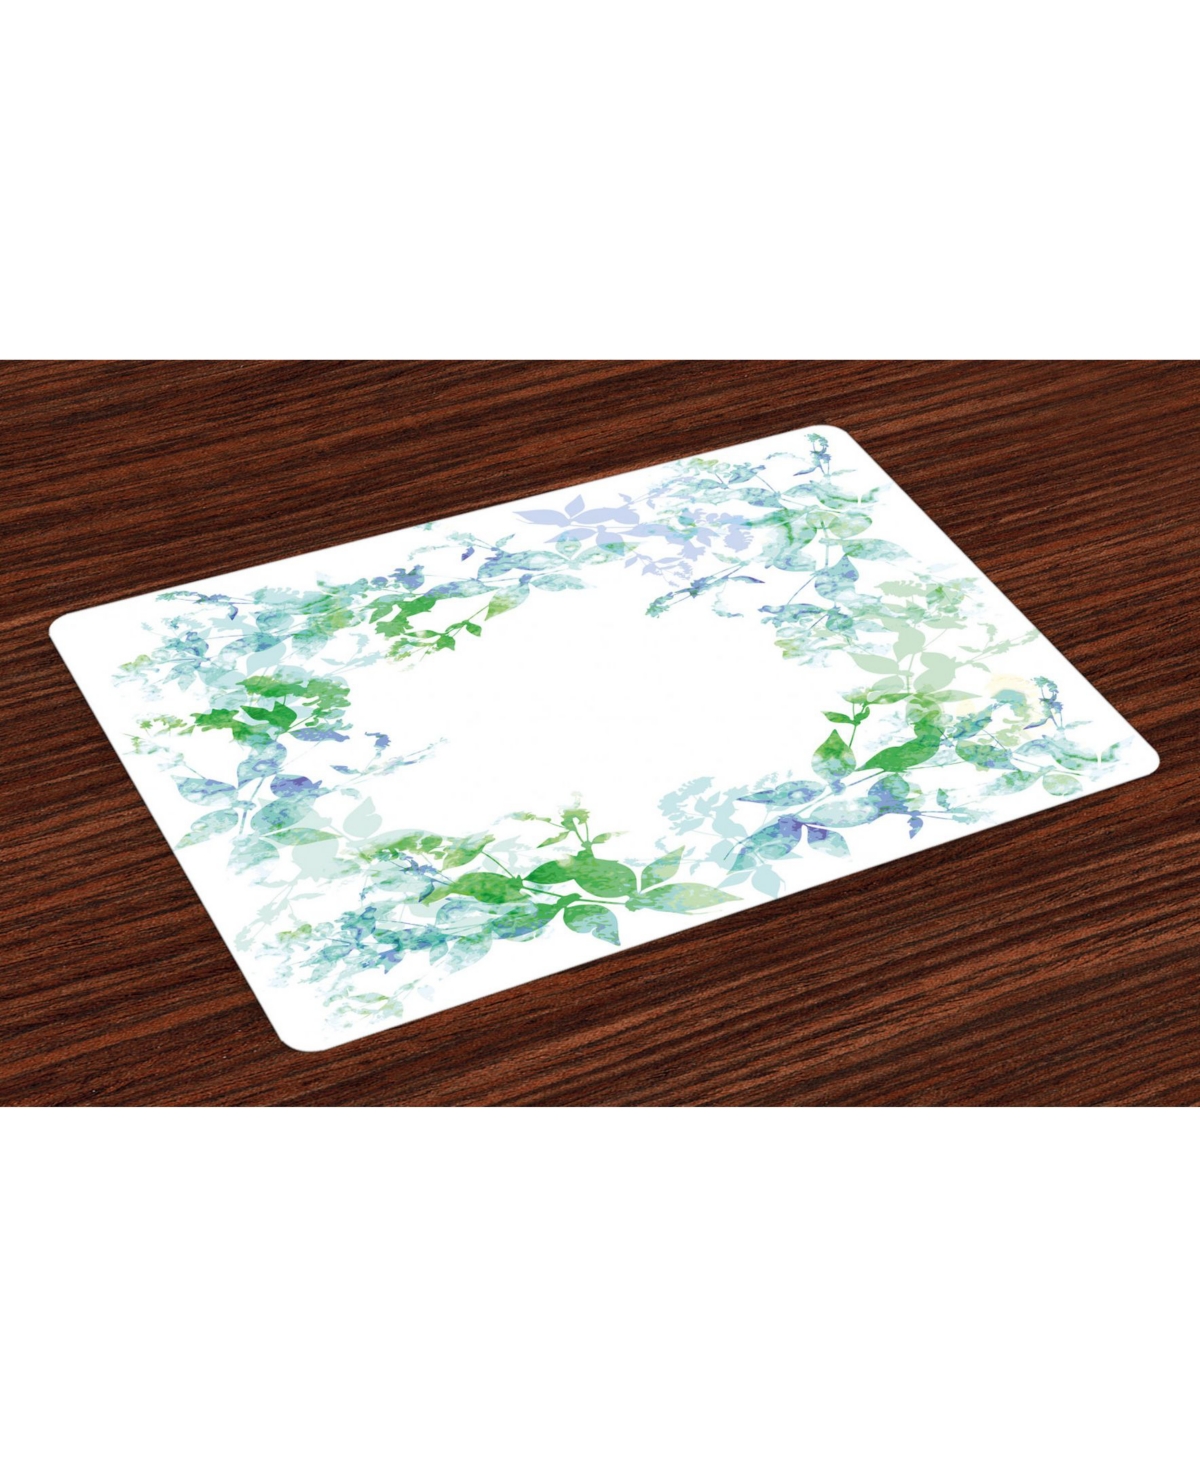 AMBESONNE MINT PLACE MATS, SET OF 4